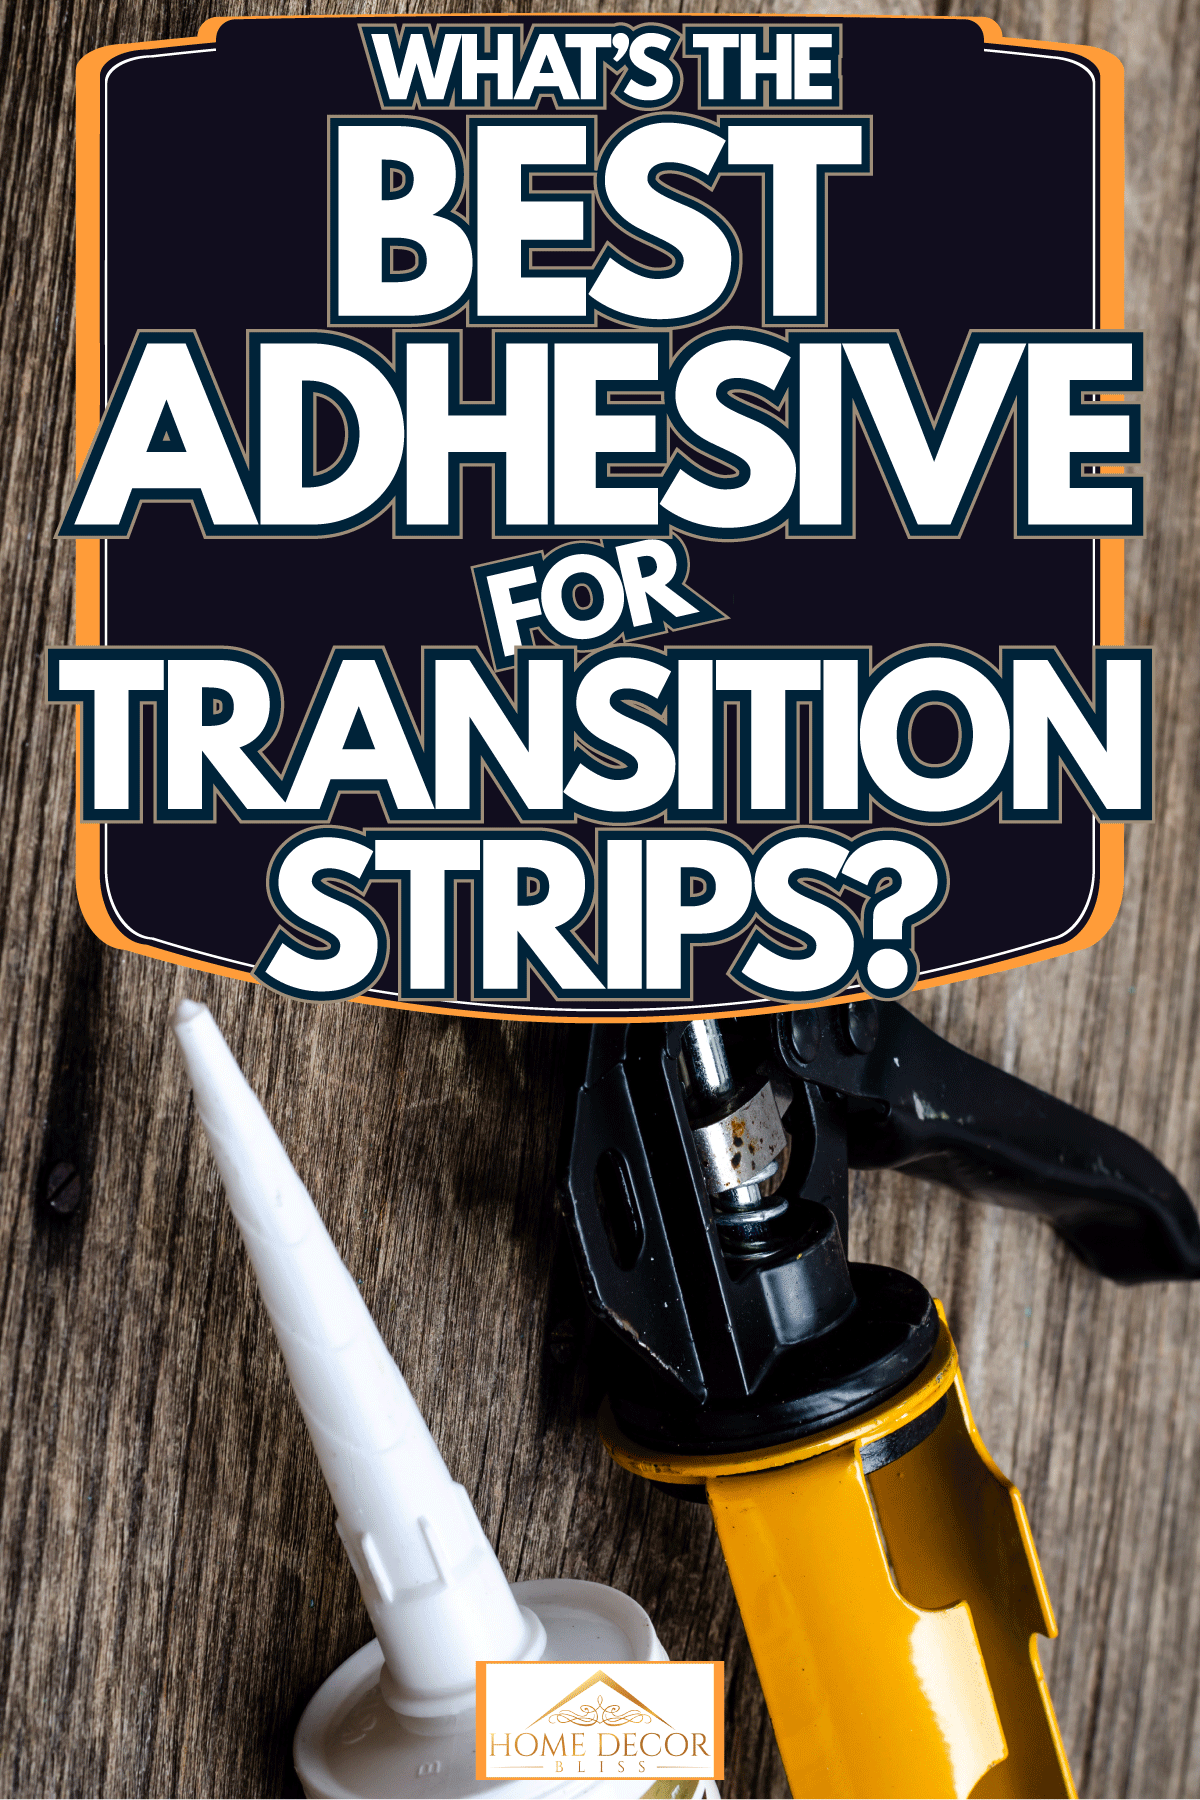 A caulking gun on the table, What's The Best Adhesive For Transition Strips?